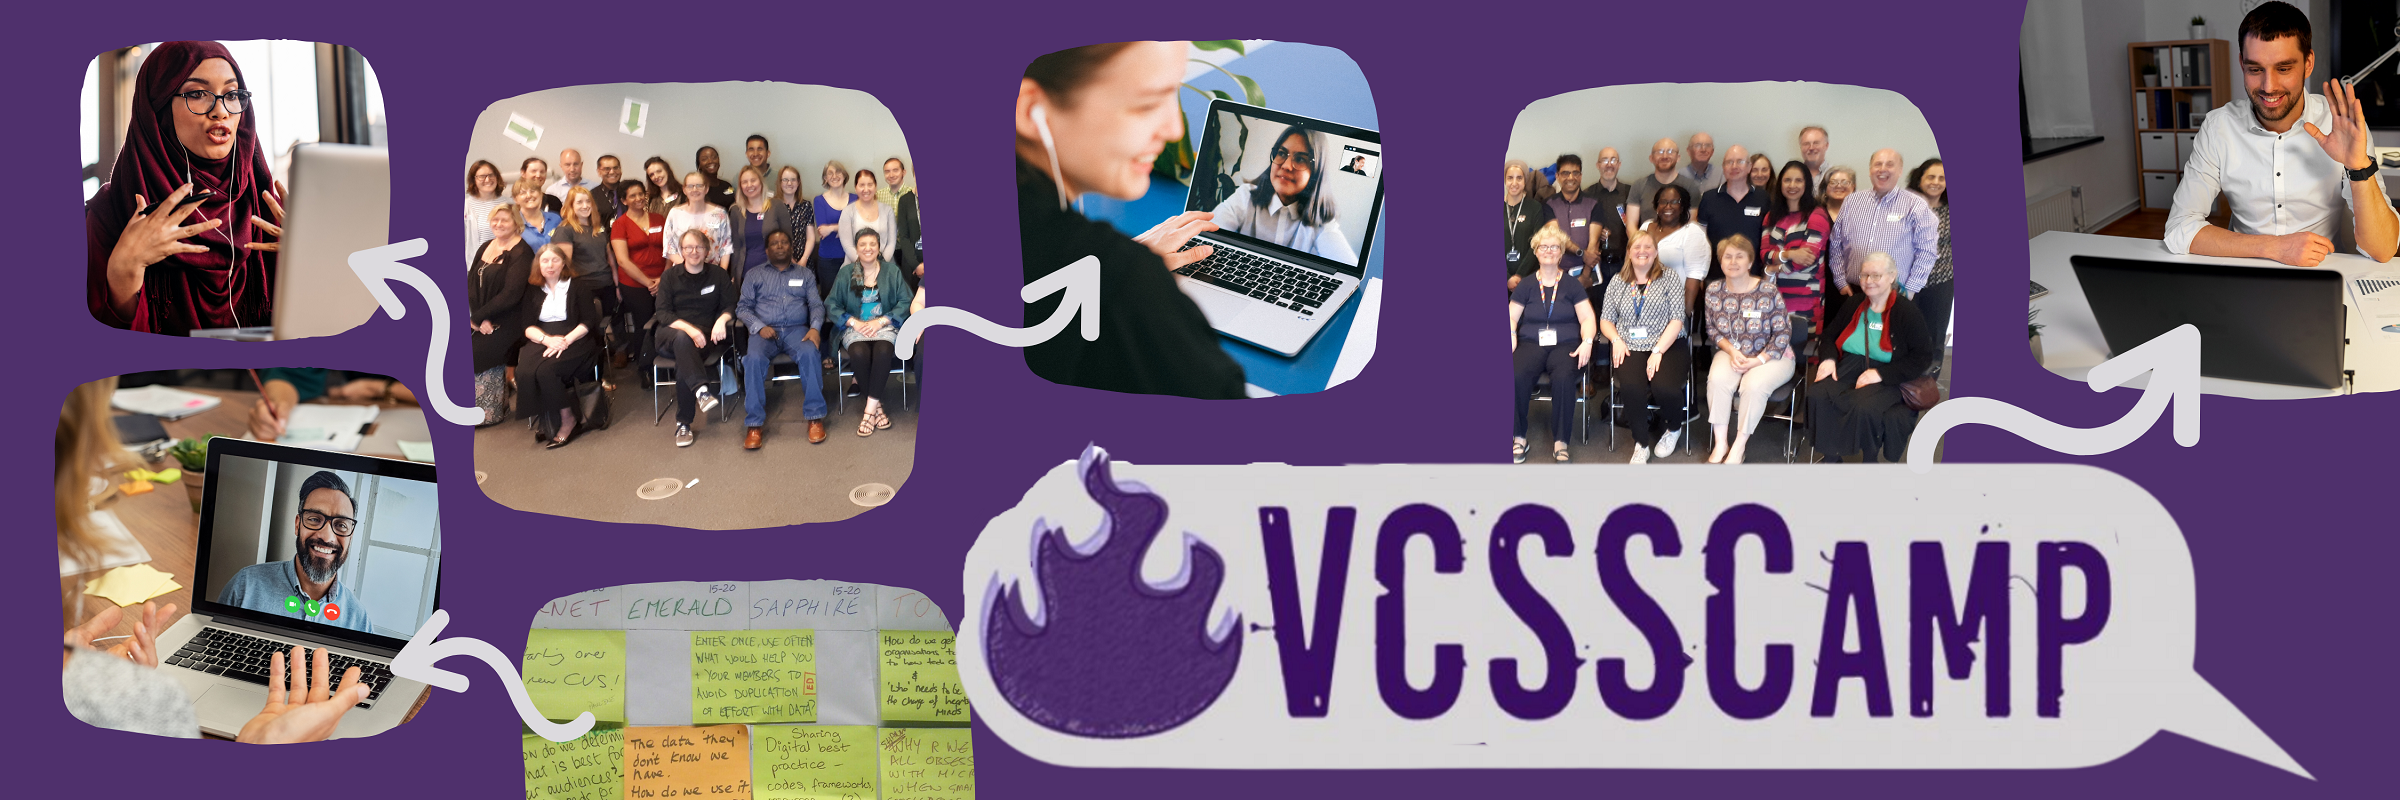 VCSS Camp 9 banner image - photos from previous in person events along with other other people using digital technology